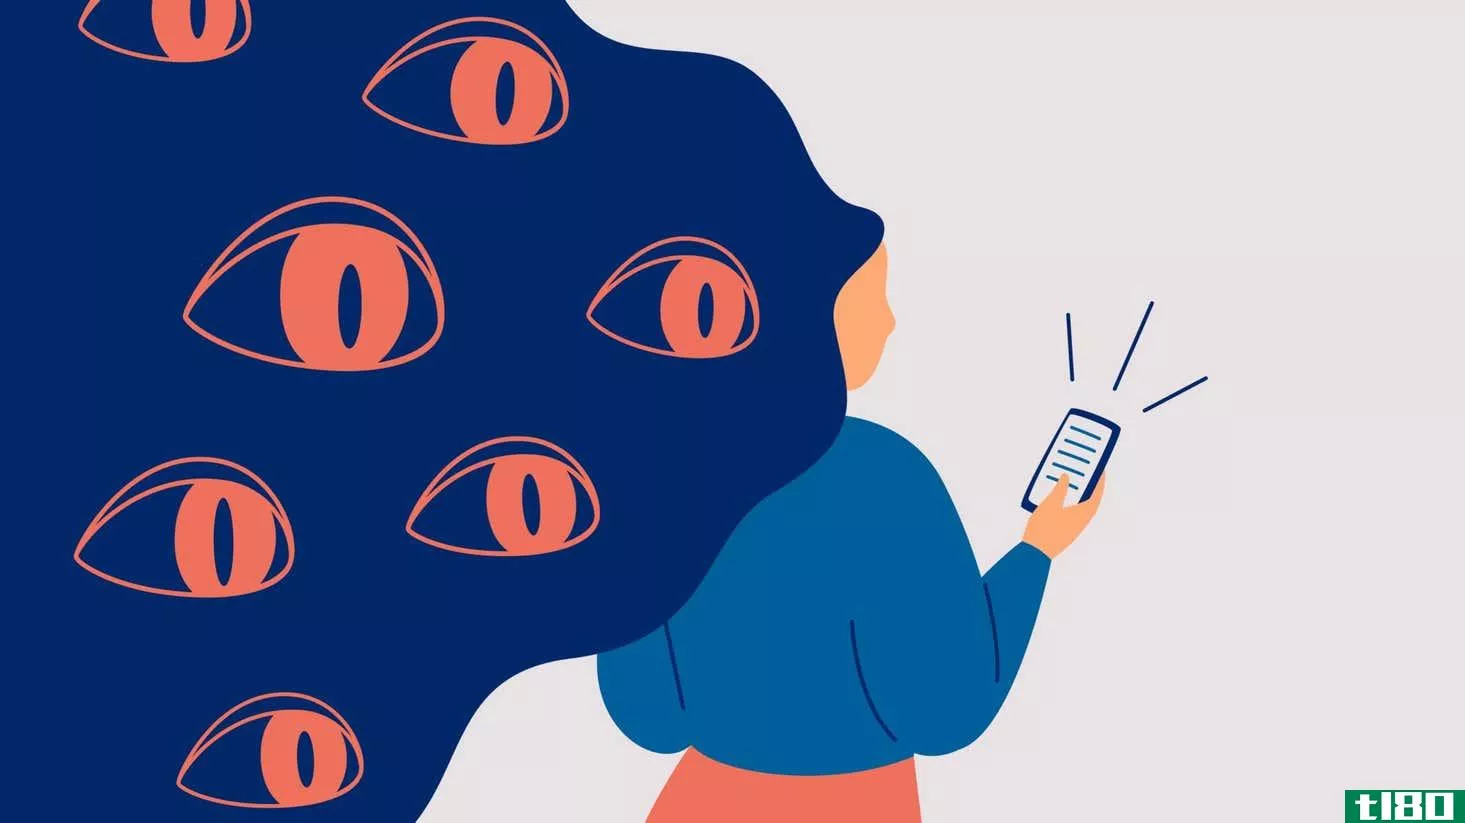 An illustration of a woman using a smartphone, with big eyes peeking out through her hair